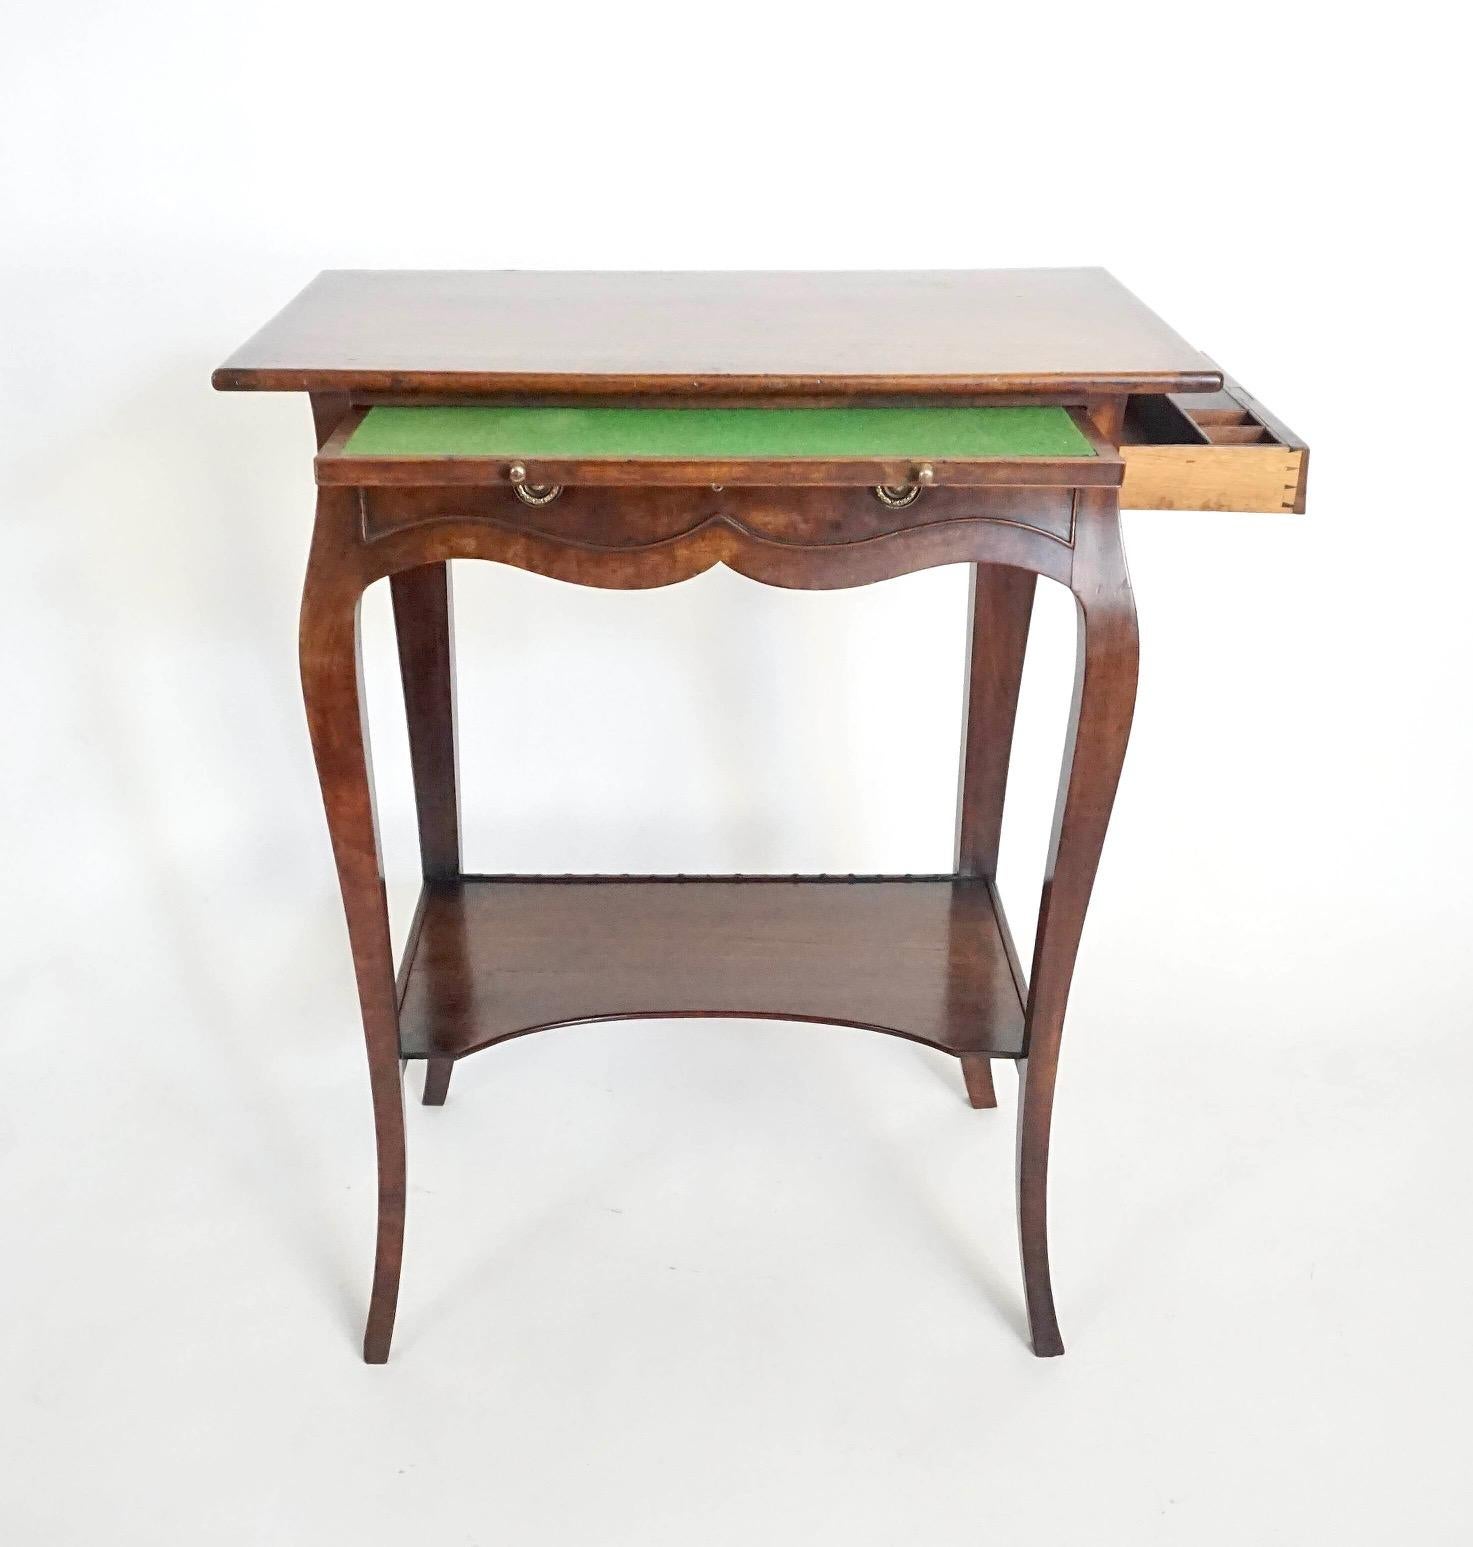 English George III Sabicu & Gonçalo Alves Work Table in the Manner of John Cobb For Sale 6